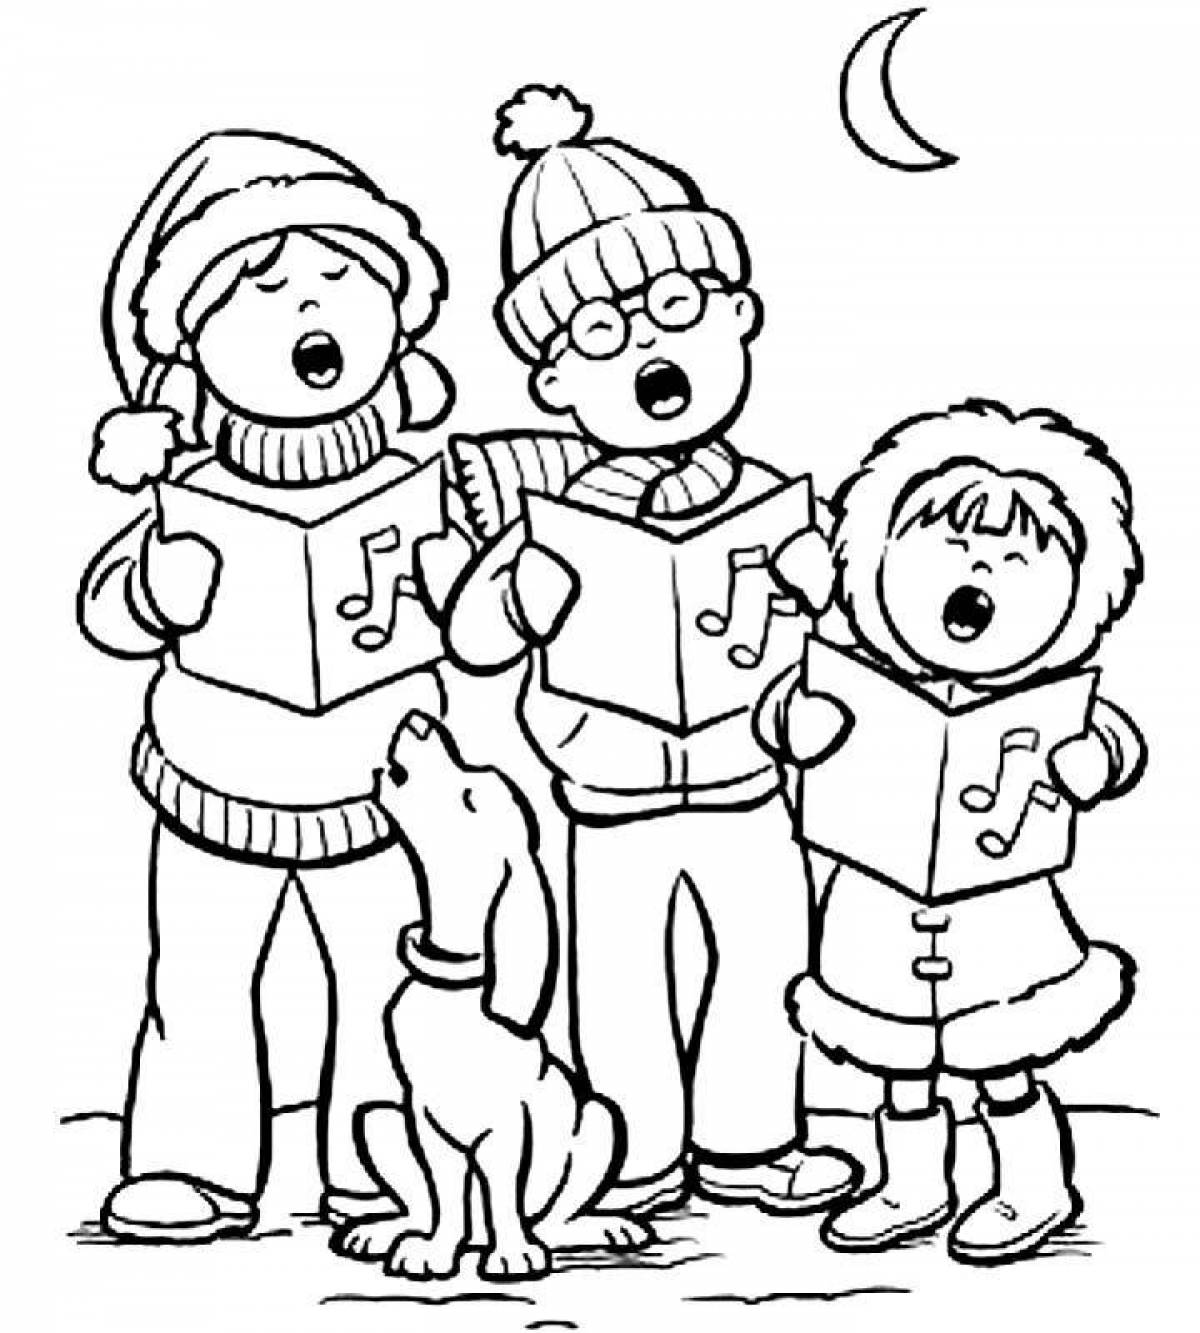 Amazing carol coloring pages for kids